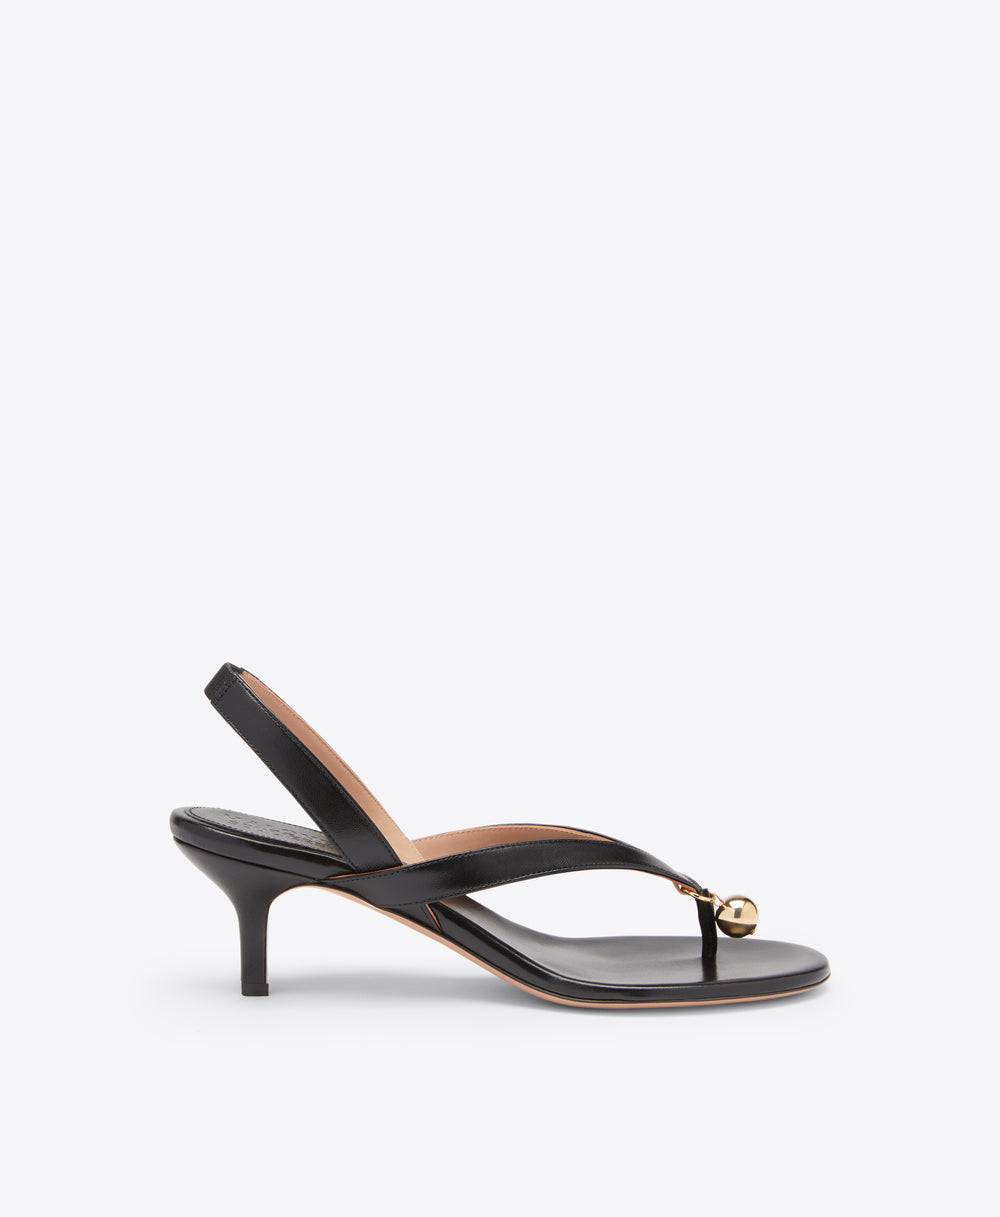 Lucie 45 Black Leather Heeled Sandal Malone Souliers